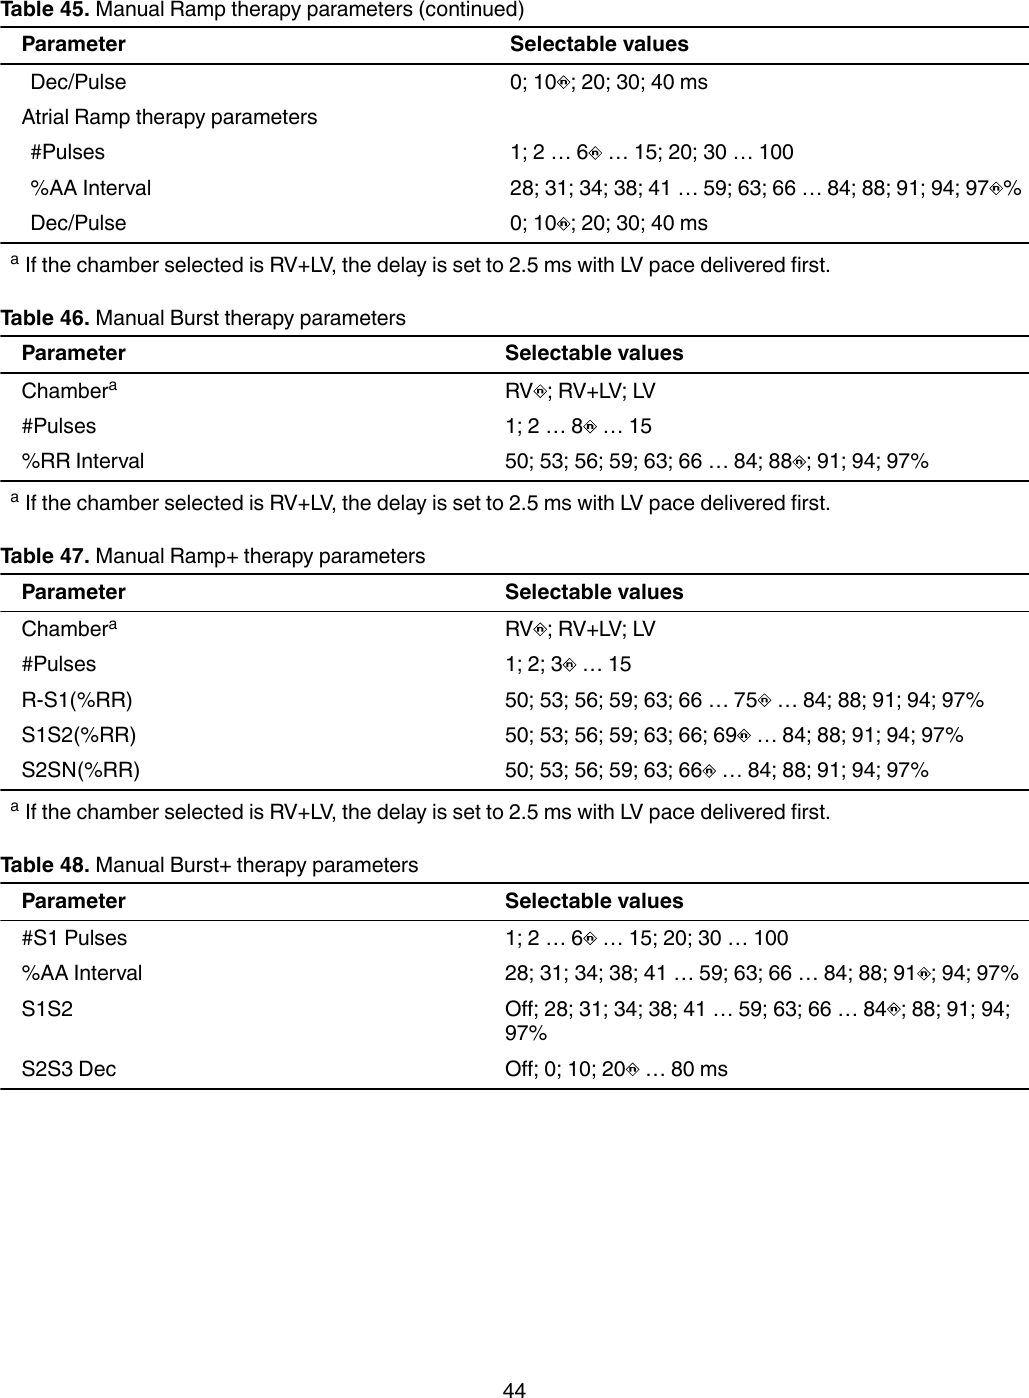 Table 45. Manual Ramp therapy parameters (continued)Parameter Selectable valuesDec/Pulse 0; 10 ; 20; 30; 40 msAtrial Ramp therapy parameters#Pulses 1; 2 … 6  … 15; 20; 30 … 100%AA Interval 28; 31; 34; 38; 41 … 59; 63; 66 … 84; 88; 91; 94; 97 %Dec/Pulse 0; 10 ; 20; 30; 40 msaIf the chamber selected is RV+LV, the delay is set to 2.5 ms with LV pace delivered first.Table 46. Manual Burst therapy parametersParameter Selectable valuesChamberaRV ; RV+LV; LV#Pulses 1; 2 … 8  … 15%RR Interval 50; 53; 56; 59; 63; 66 … 84; 88 ; 91; 94; 97%aIf the chamber selected is RV+LV, the delay is set to 2.5 ms with LV pace delivered first.Table 47. Manual Ramp+ therapy parametersParameter Selectable valuesChamberaRV ; RV+LV; LV#Pulses 1; 2; 3  … 15R-S1(%RR) 50; 53; 56; 59; 63; 66 … 75  … 84; 88; 91; 94; 97%S1S2(%RR) 50; 53; 56; 59; 63; 66; 69  … 84; 88; 91; 94; 97%S2SN(%RR) 50; 53; 56; 59; 63; 66  … 84; 88; 91; 94; 97%aIf the chamber selected is RV+LV, the delay is set to 2.5 ms with LV pace delivered first.Table 48. Manual Burst+ therapy parametersParameter Selectable values#S1 Pulses 1; 2 … 6  … 15; 20; 30 … 100%AA Interval 28; 31; 34; 38; 41 … 59; 63; 66 … 84; 88; 91 ; 94; 97%S1S2 Off; 28; 31; 34; 38; 41 … 59; 63; 66 … 84 ; 88; 91; 94;97%S2S3 Dec Off; 0; 10; 20  … 80 ms44